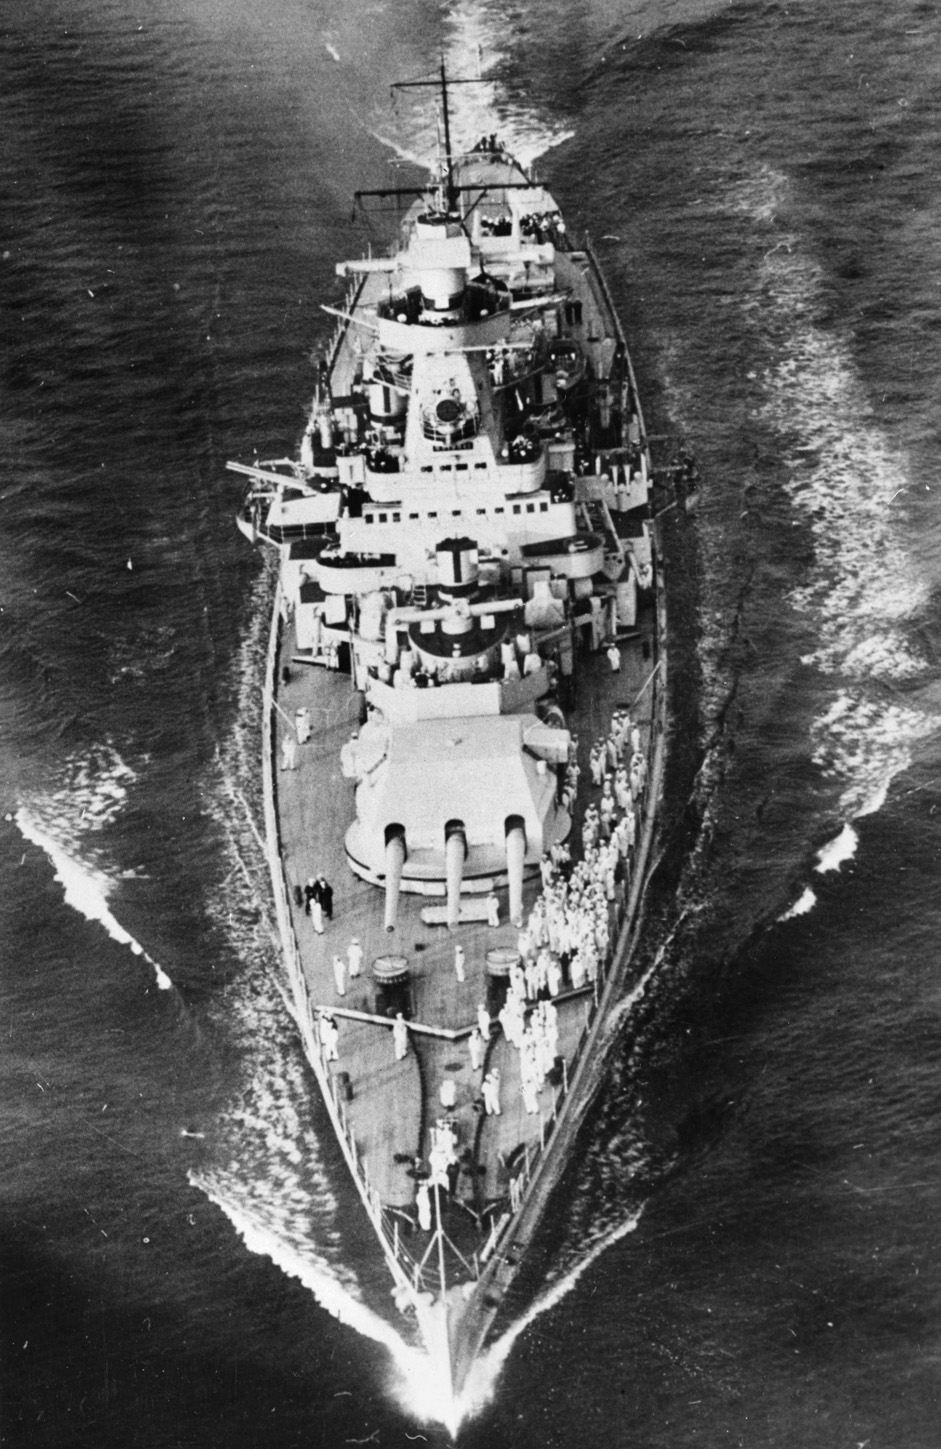 Only a few days before Great Britain declared war on Germany, the pocket battleship Graf Spee is shown underway in the English Channel in August 1939. After the declaration of war, Graf Spee amassed an impressive record of enemy merchant tonnage sunk before coming to grief in the waters off Montevideo.